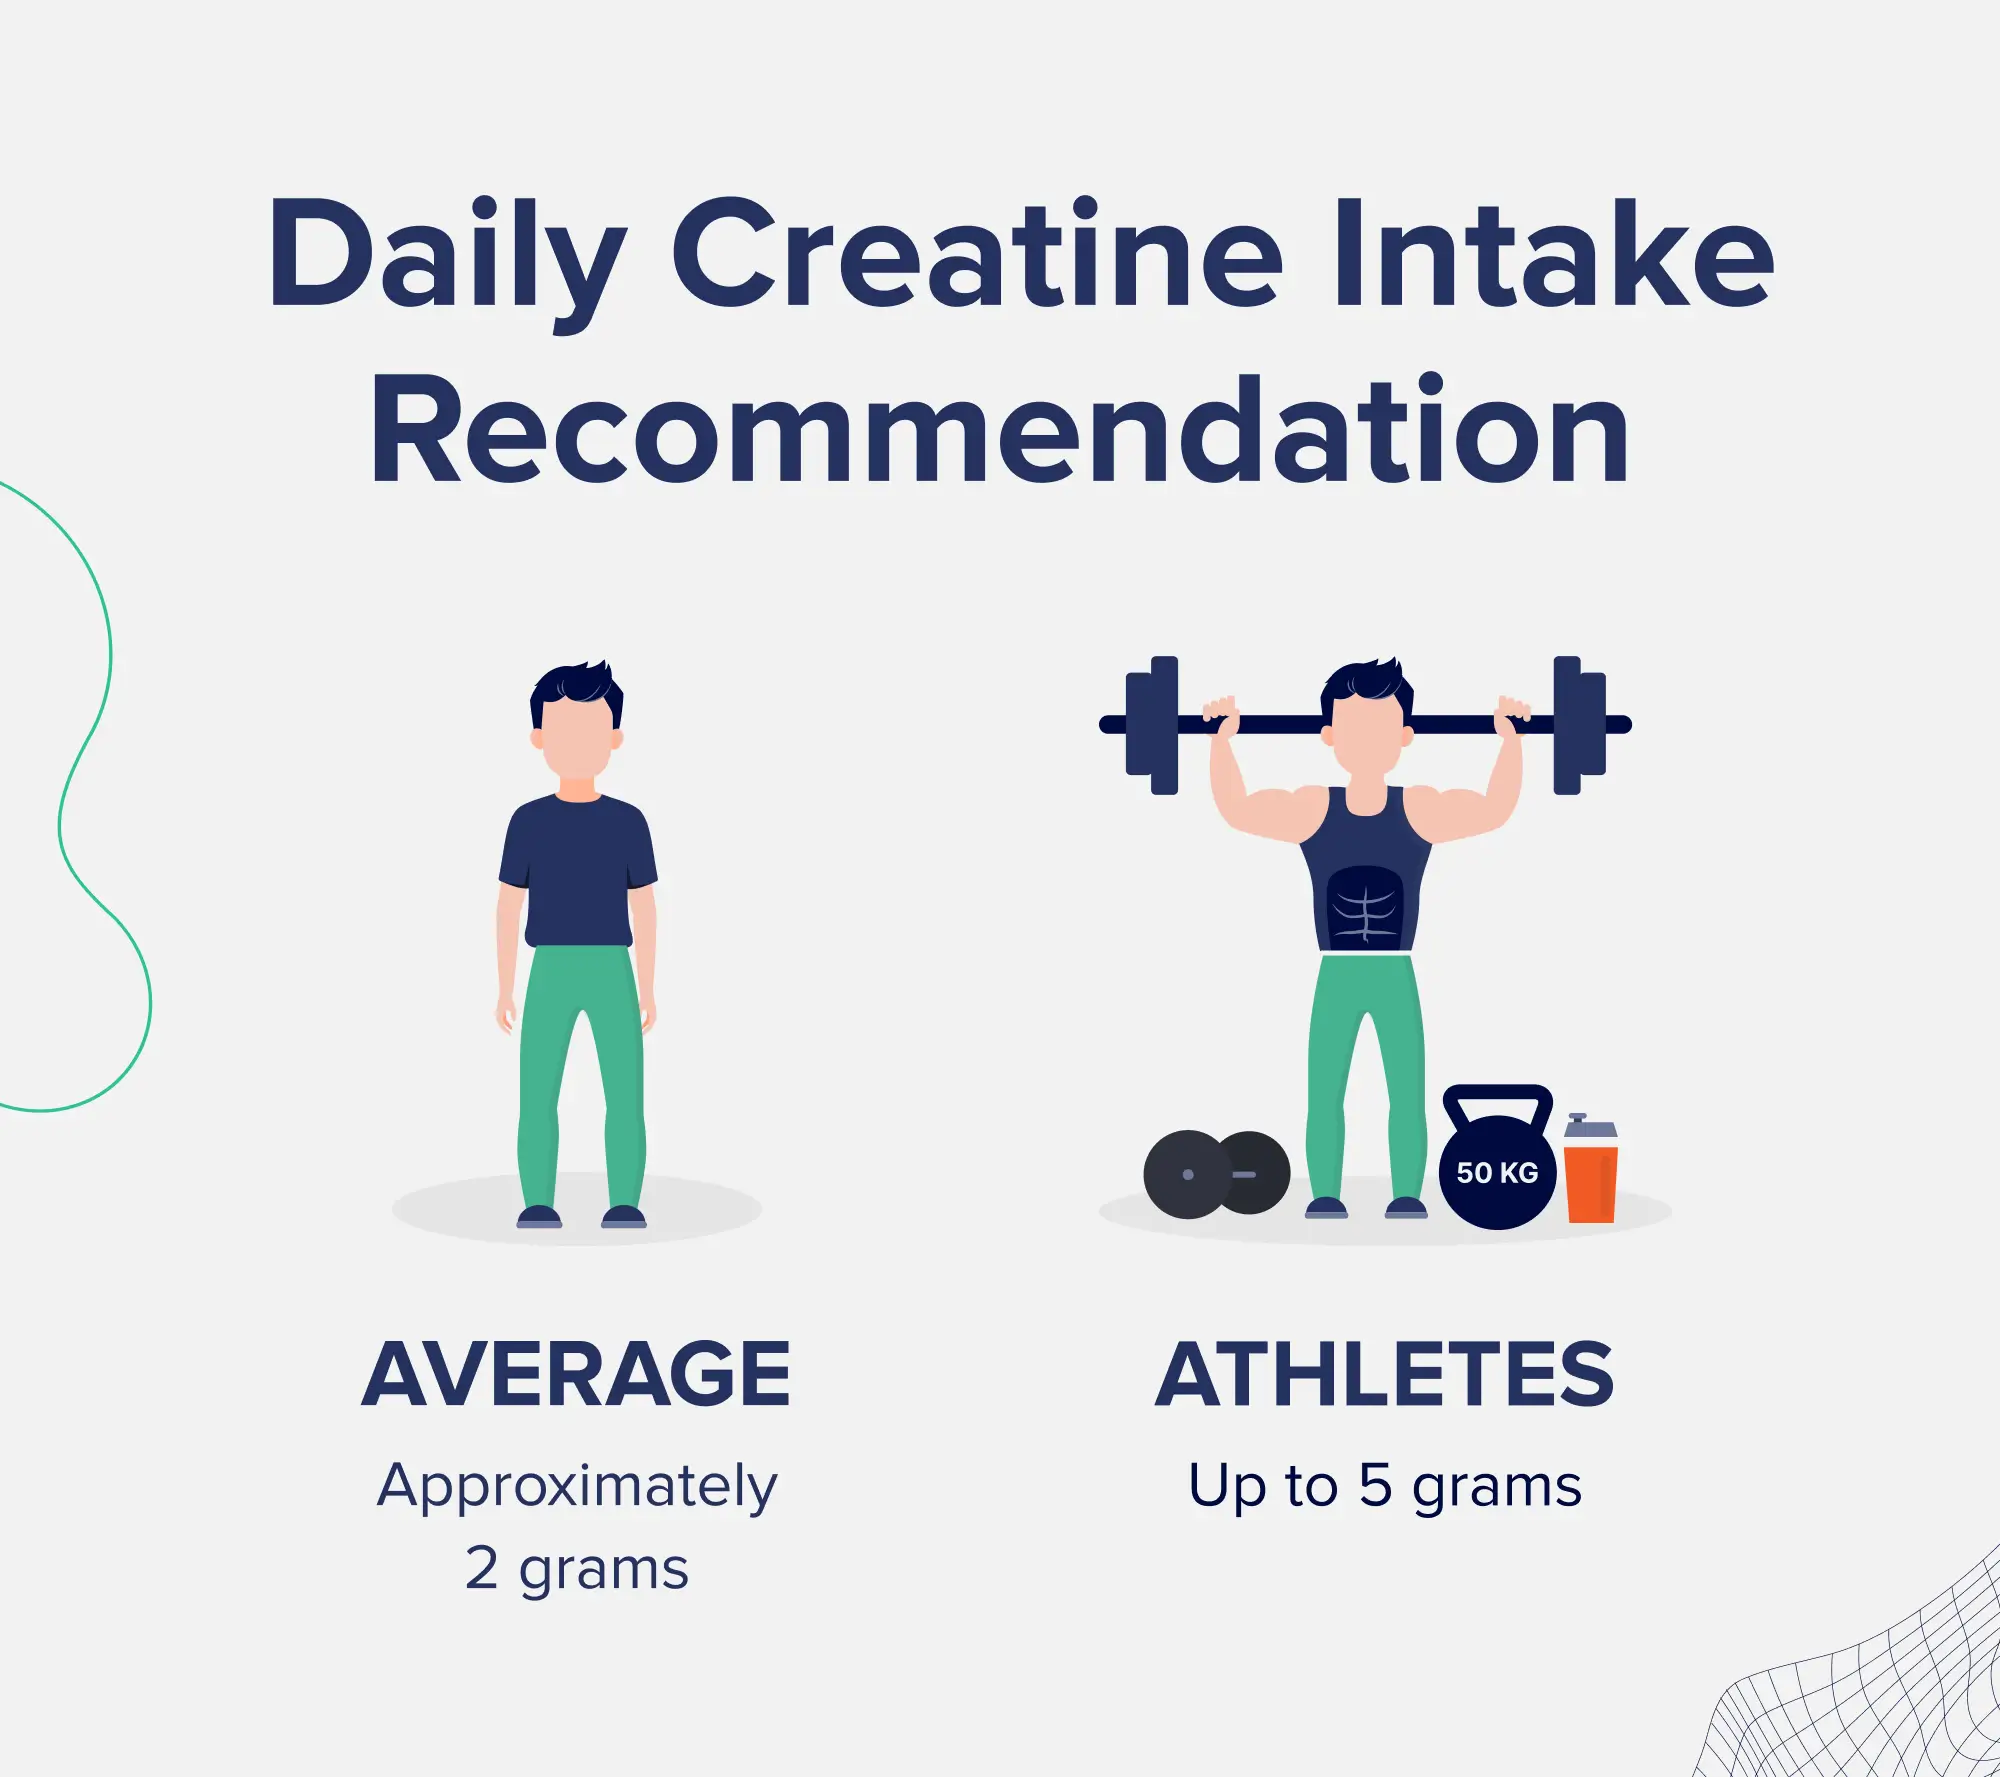 Daily creatine intake recommendation